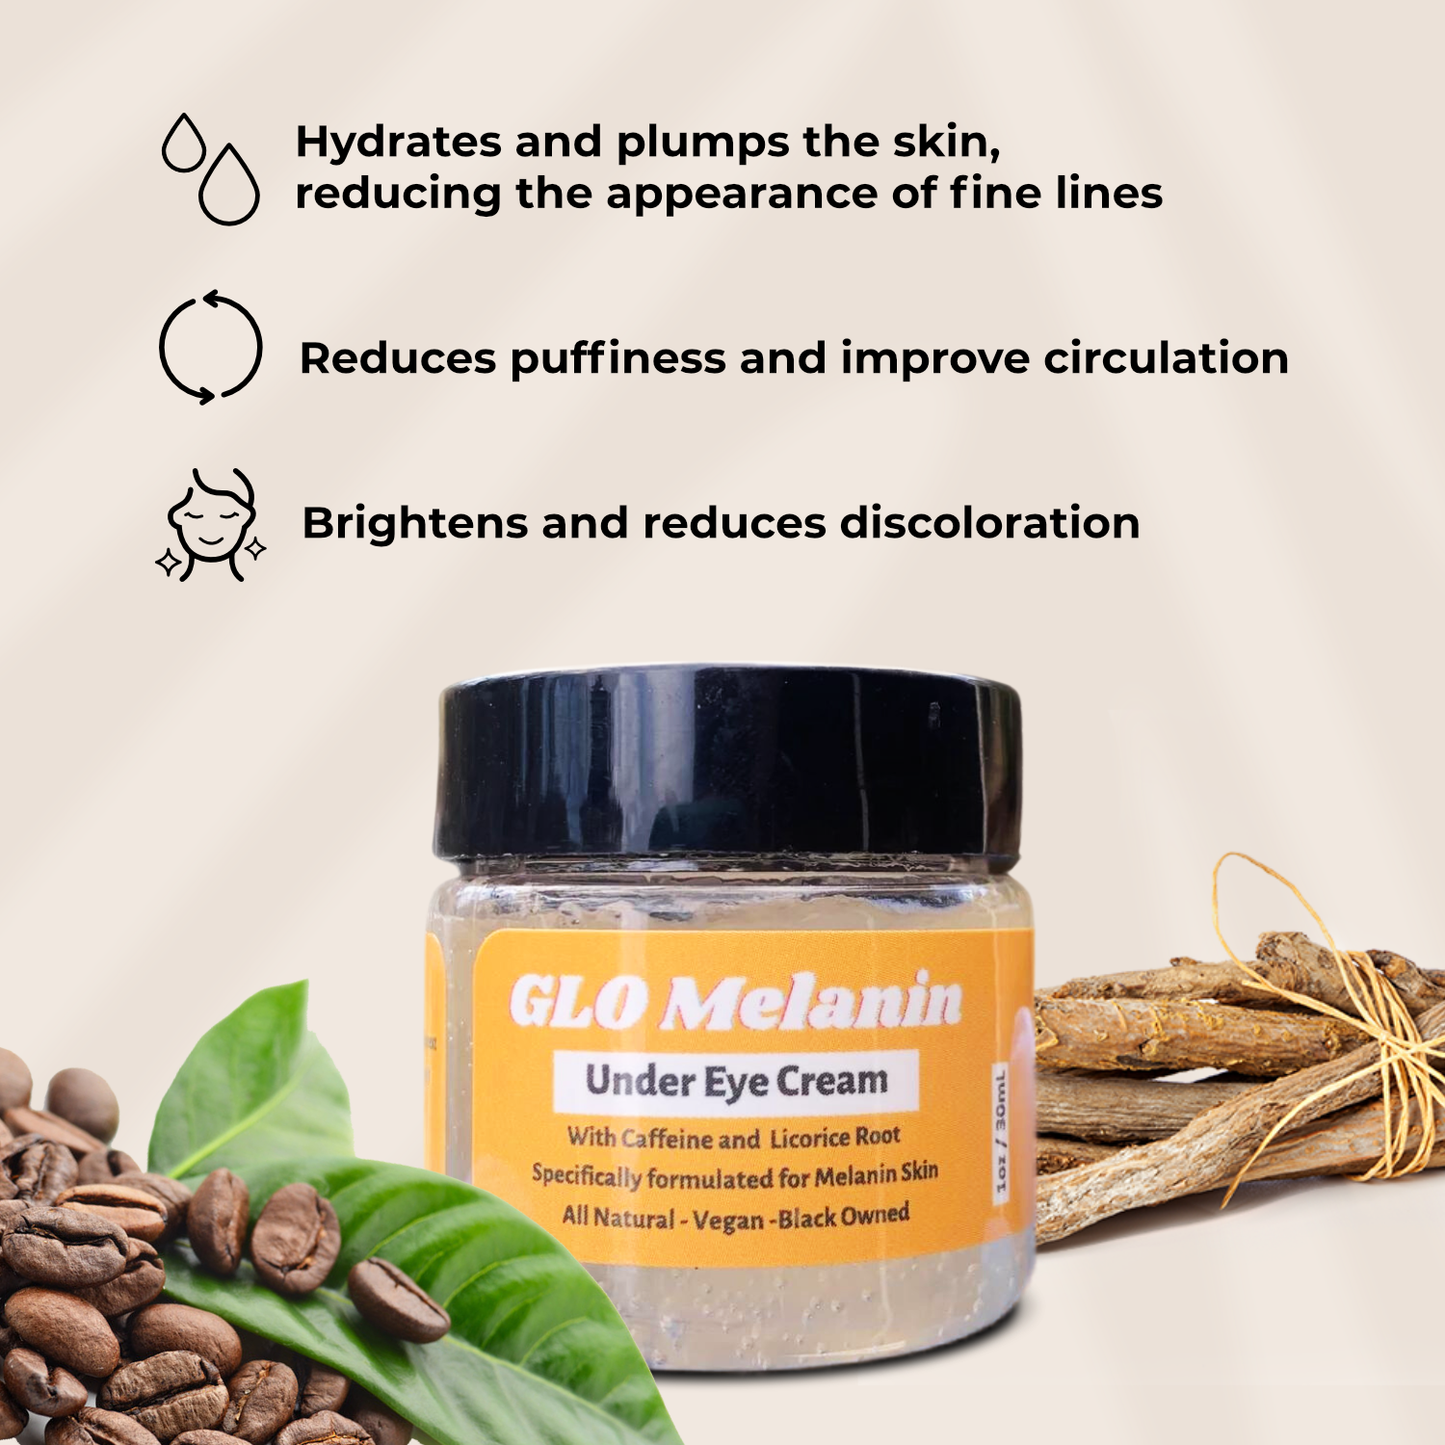 Under Eye Cream (for dark circles and puffiness)